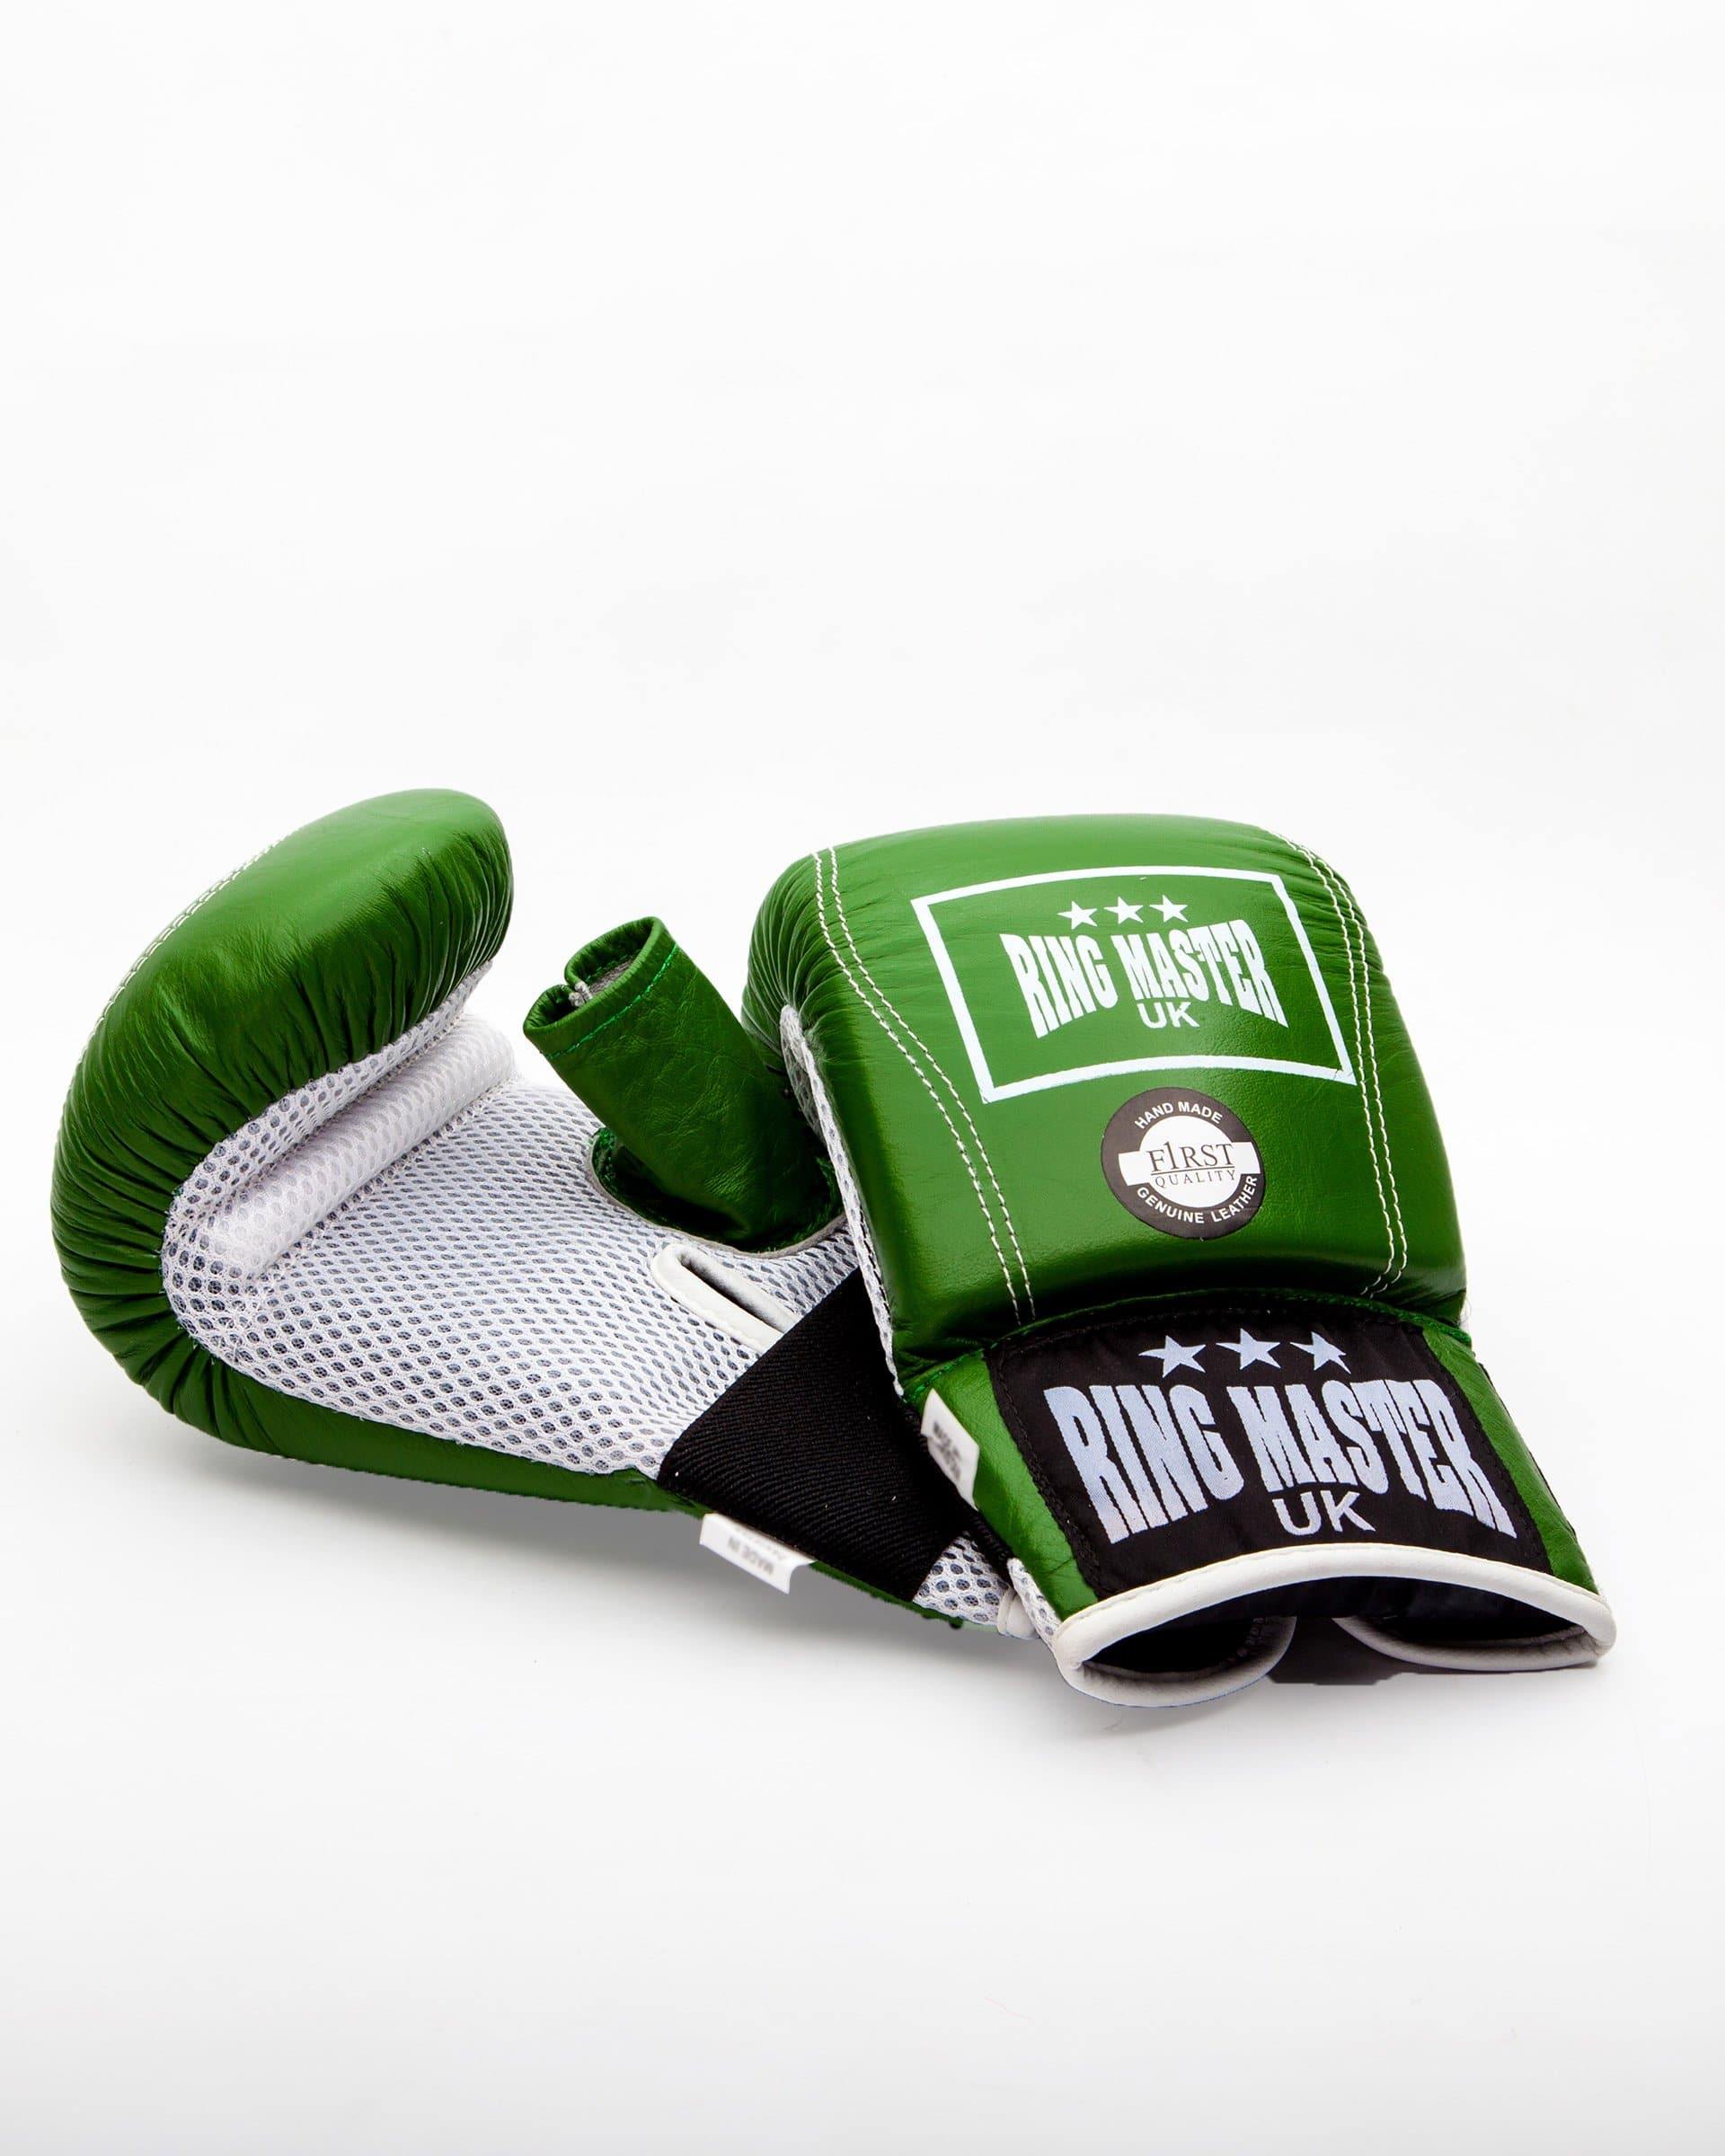 RingMaster Sports Bag Mitts Genuine Leather Green Image 2